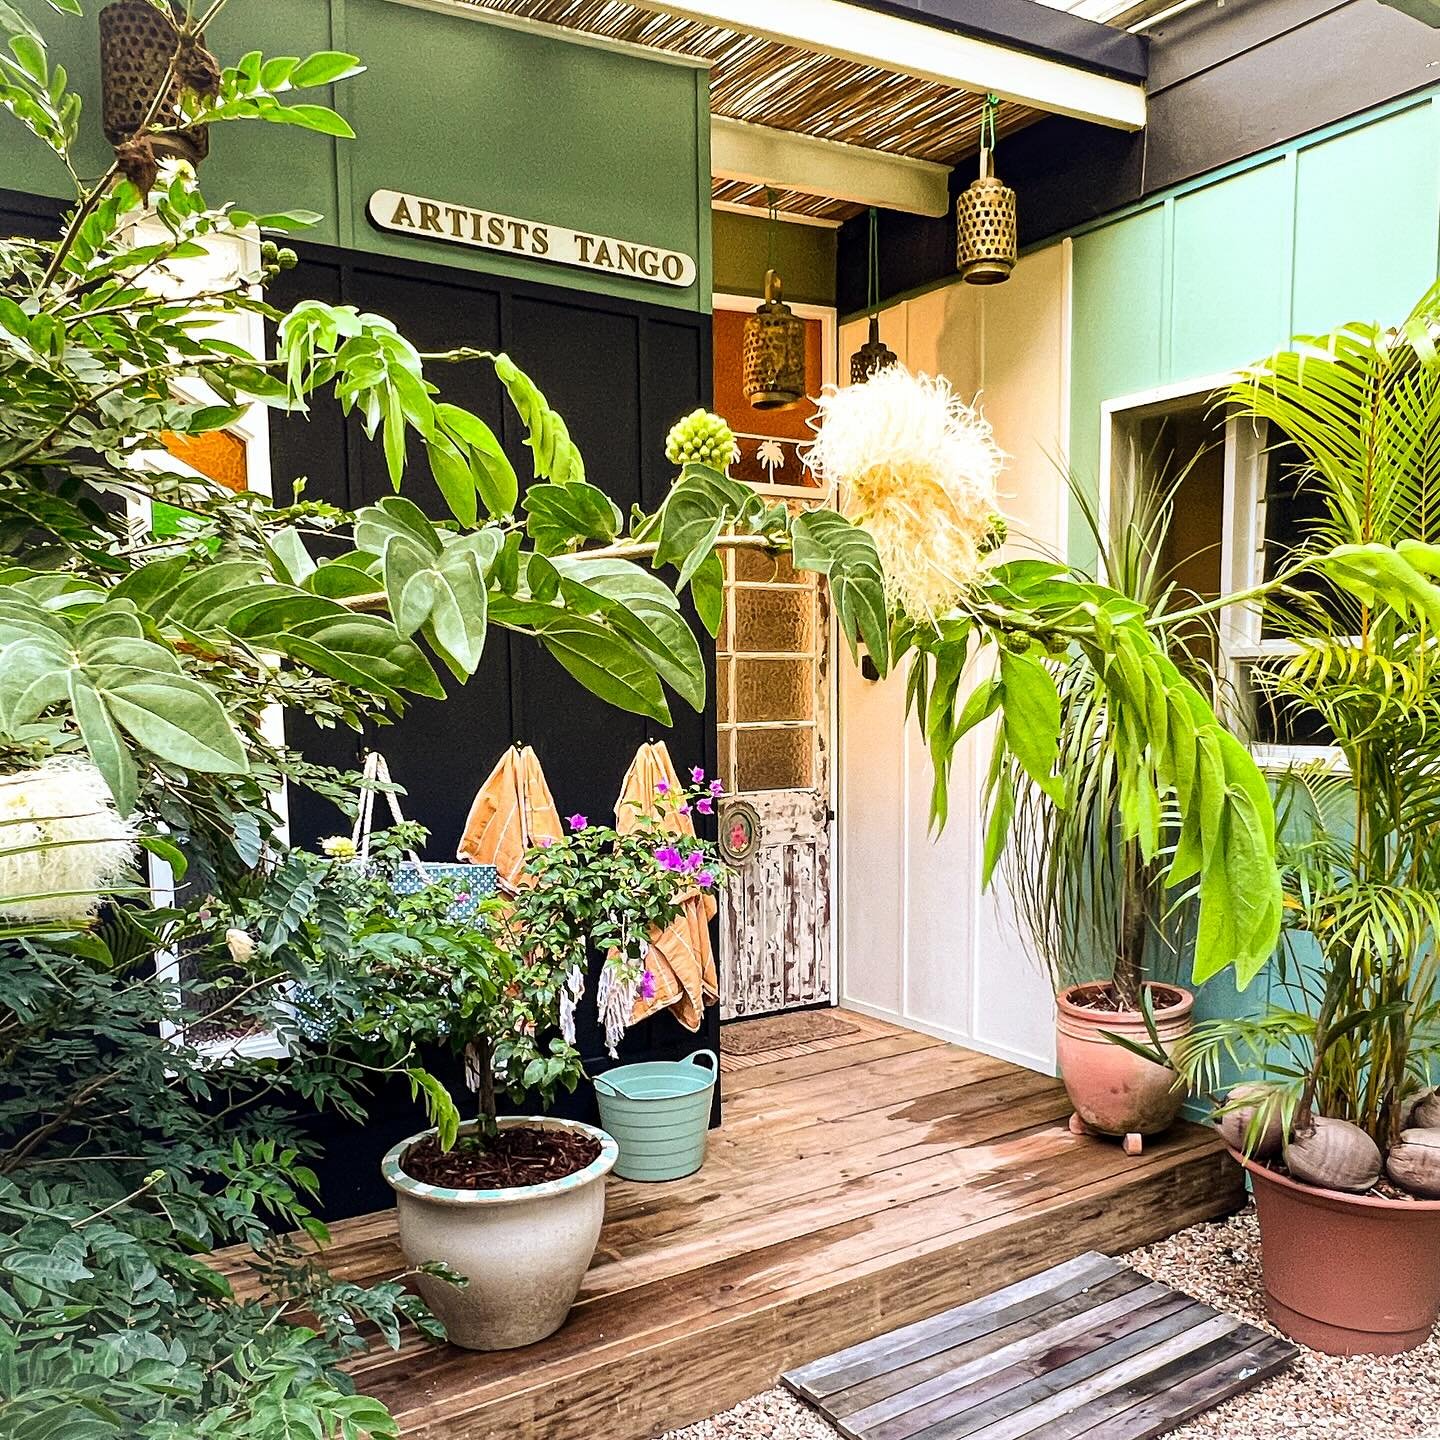 Check into the tropical life at Artists&rsquo; Houses #portdouglas #farnorthqueensland #easydays